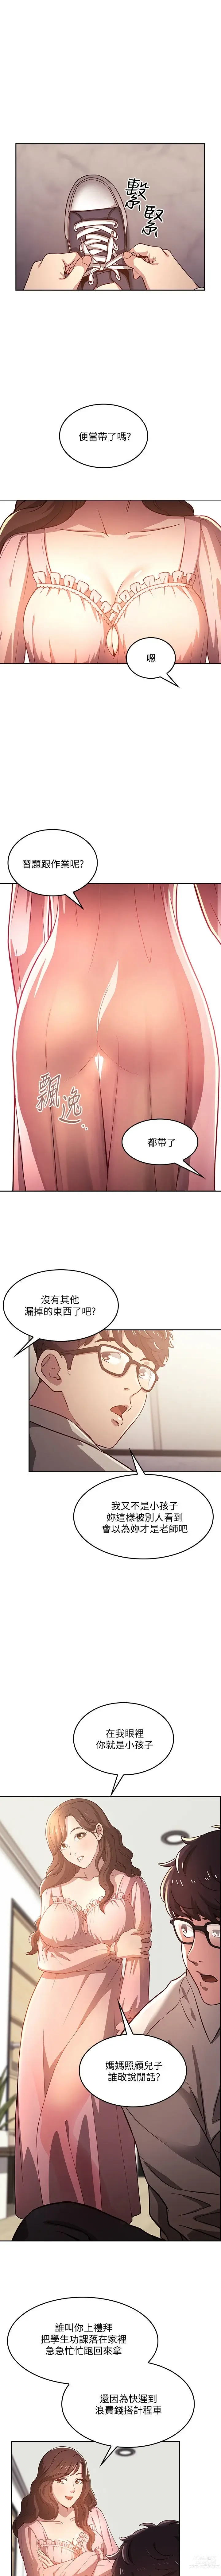 Page 2 of manga 朋友的妈妈/Mother Hunting